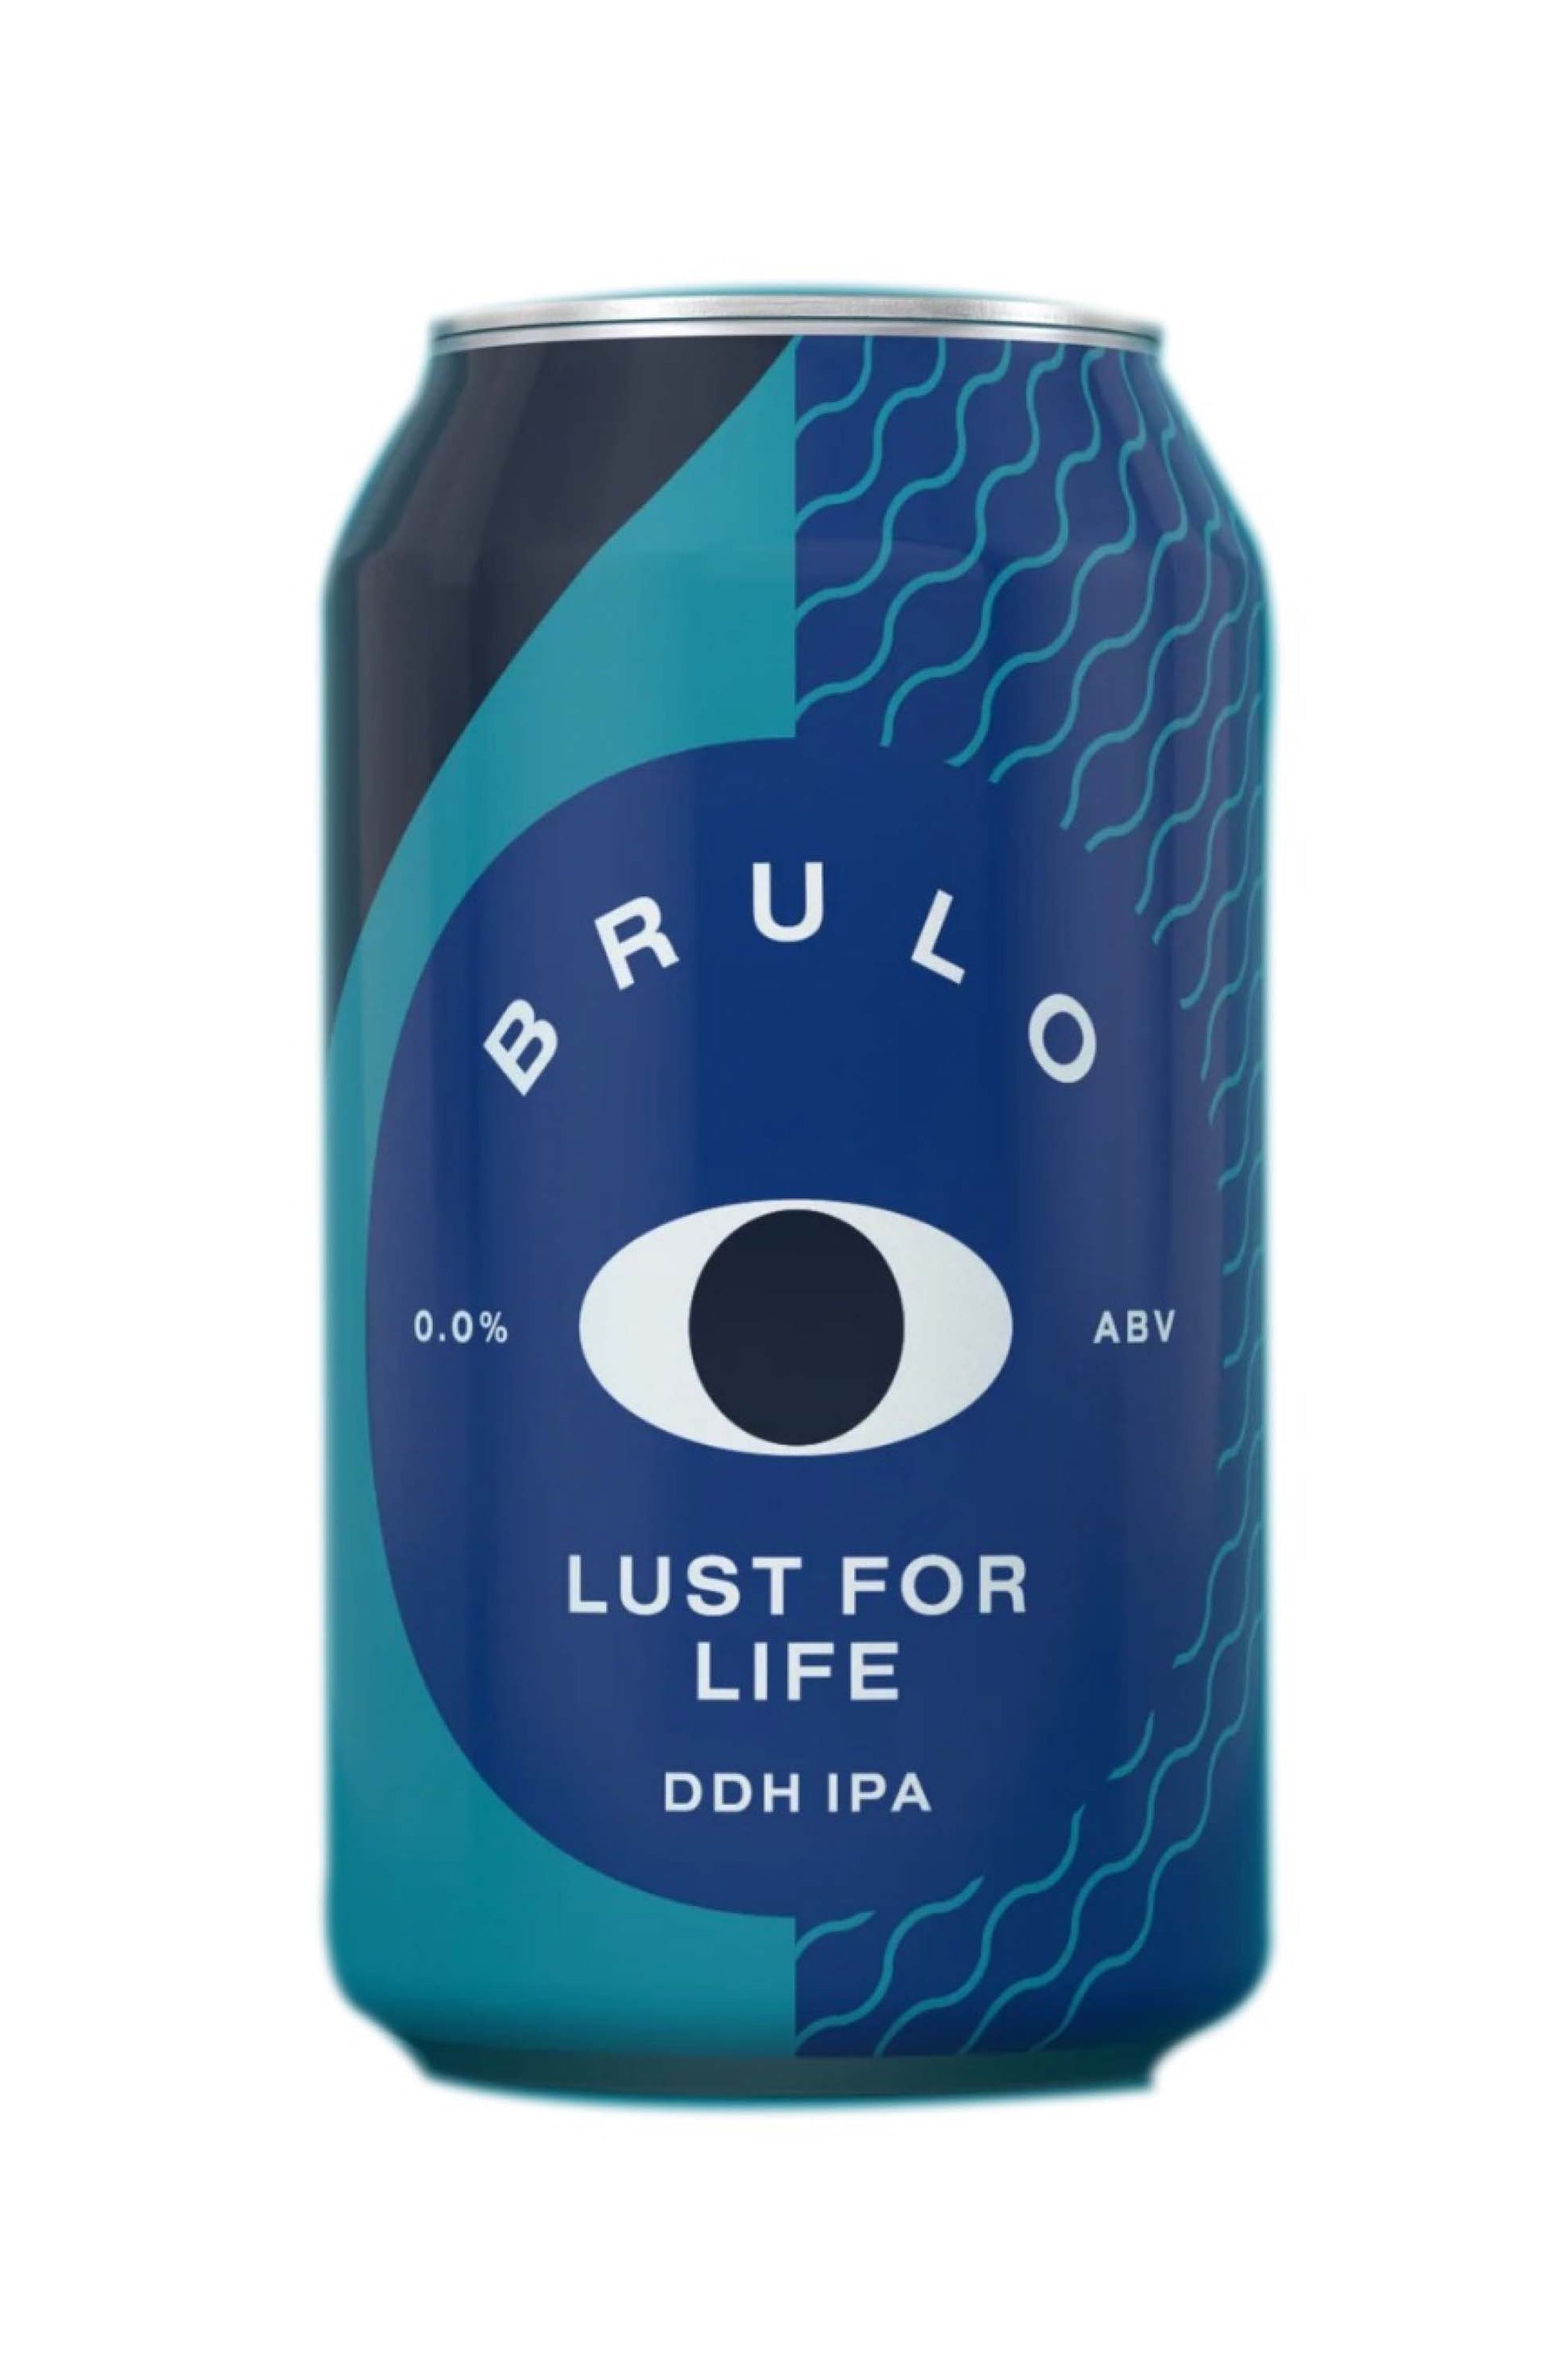 BRULO - Lust For Life DDH IPA